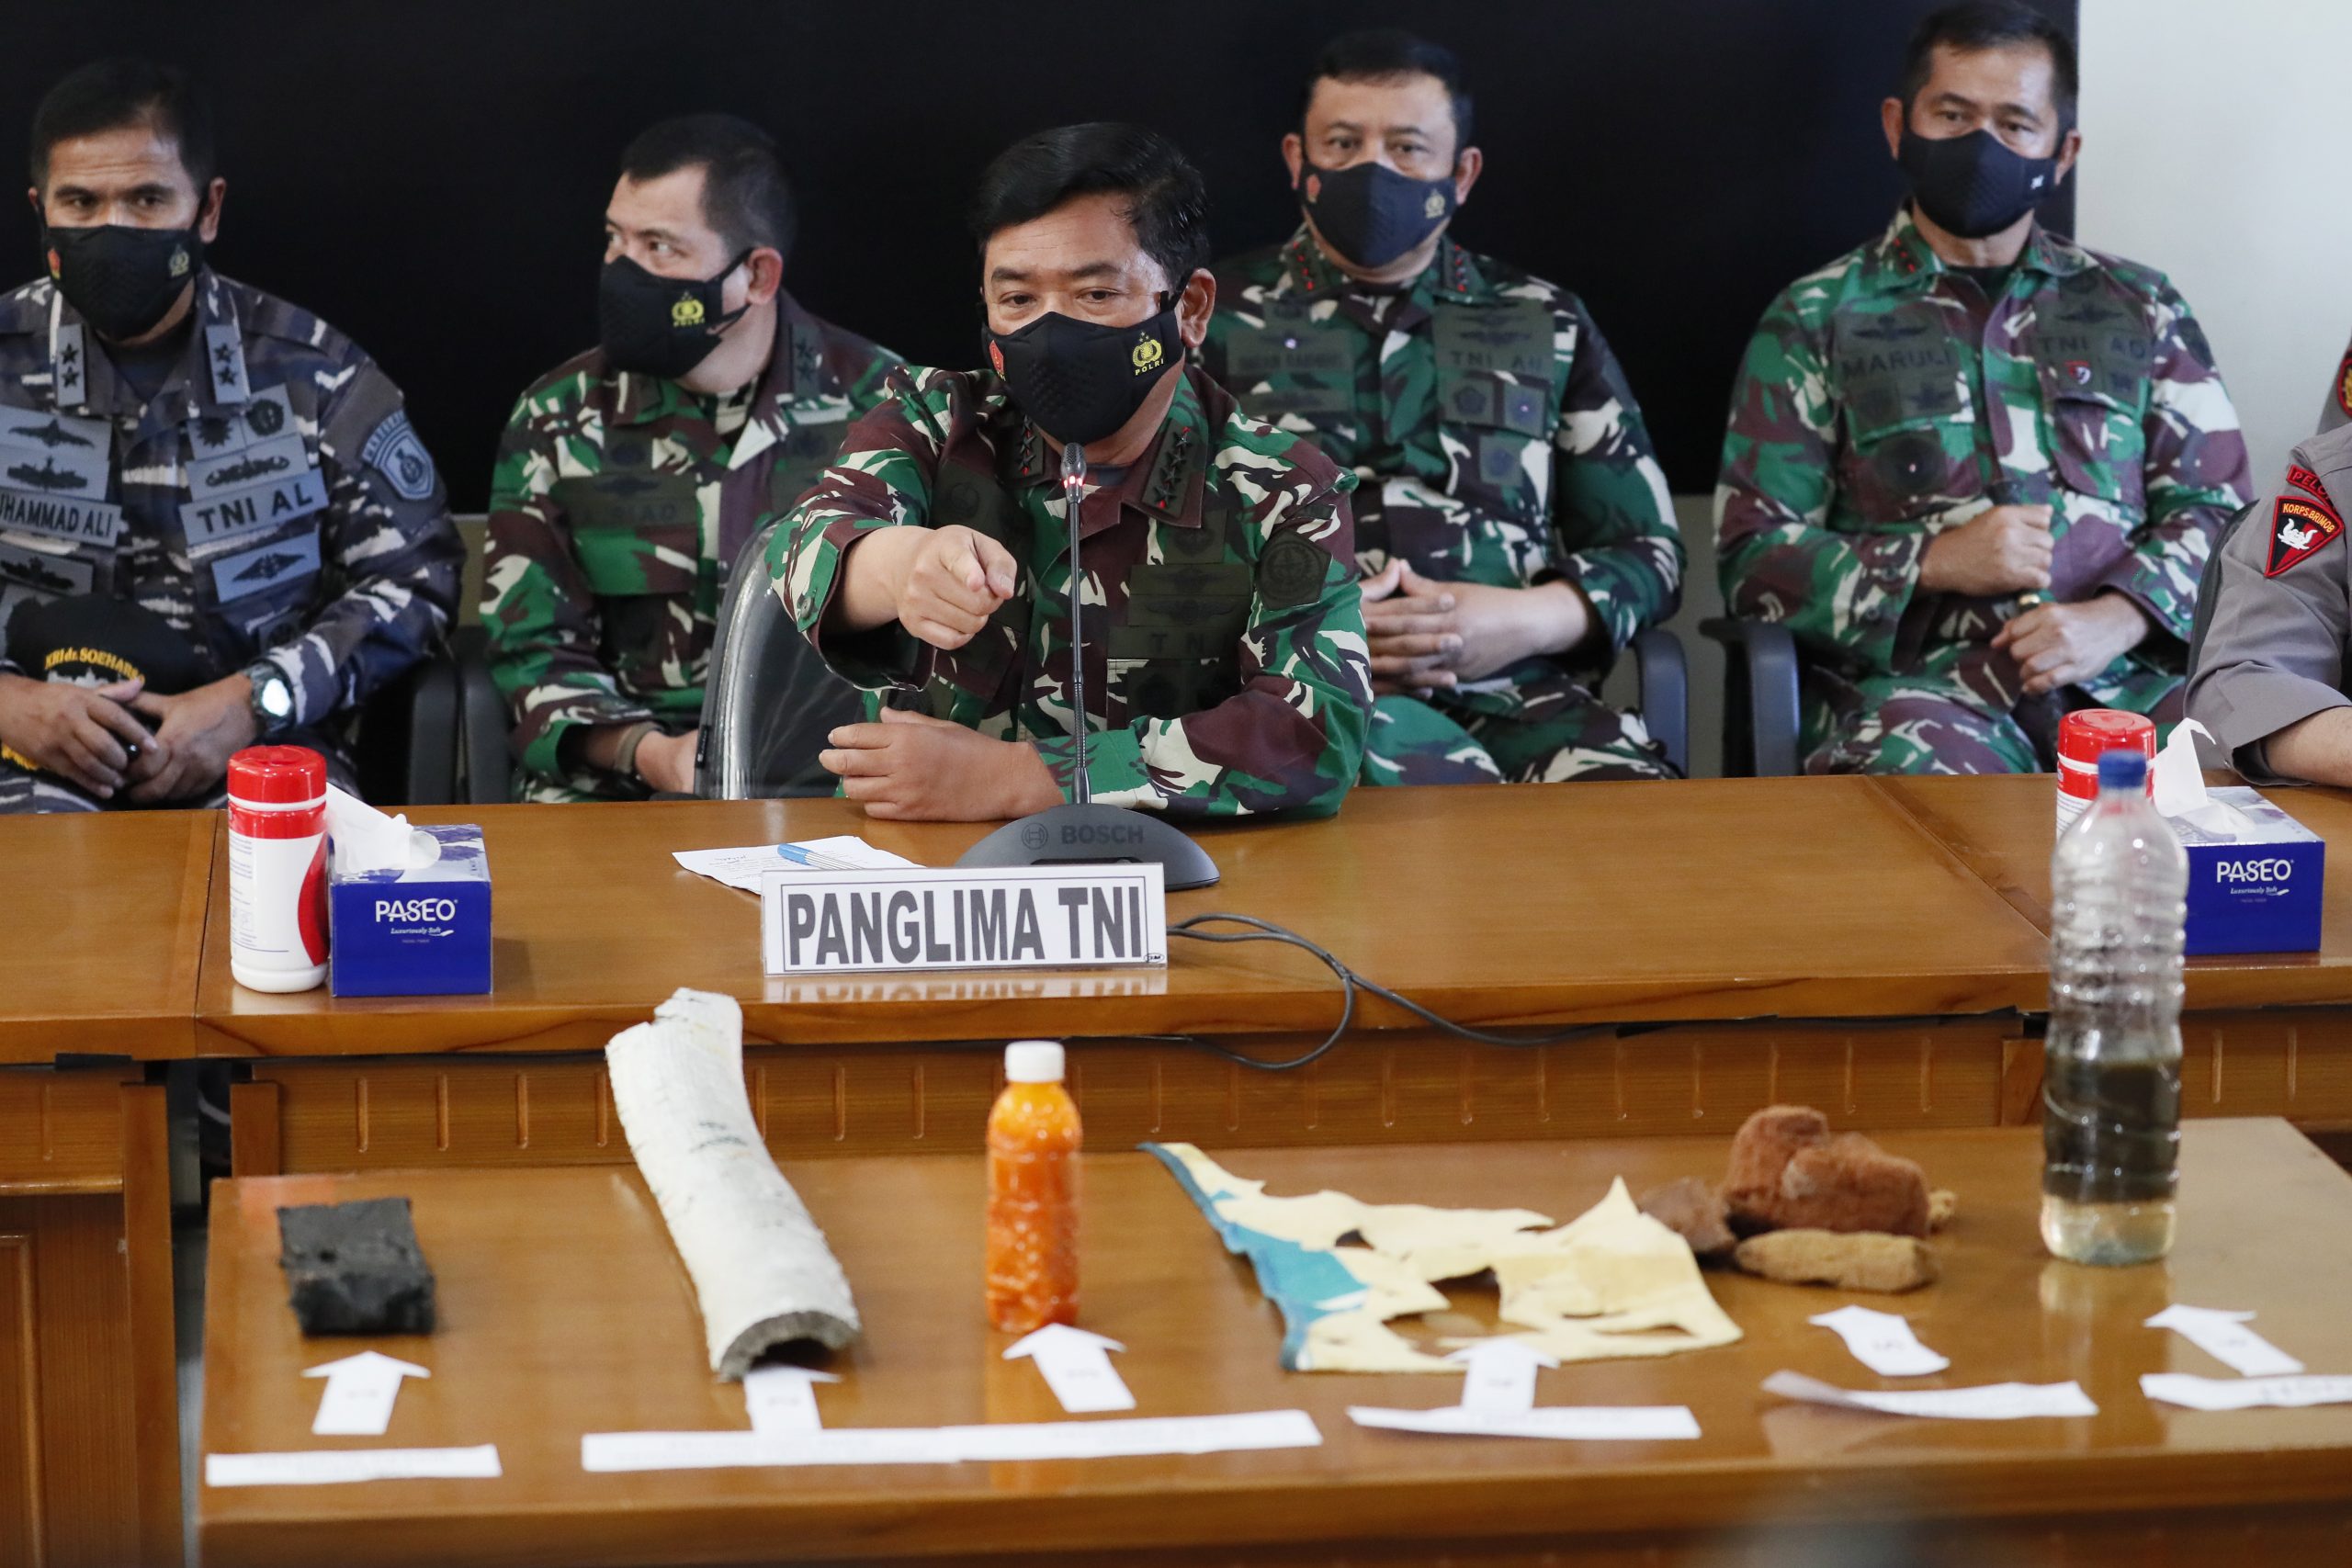 epa09156256 Indonesian military Chief Hadi Tjahjanto (C) displays debris believed to be from a missing Indonesian Navy submarine KRI Nanggala during a press conference at a command in Ngurah Rai Airport in Bali, Indonesia, 24 April 2021. The German-made submarine was reported missing on 21 April 2021 near the island of Bali with 53 people on board while preparing to conduct a torpedo drill, the the Indonesian National Armed Forces said.  EPA/MADE NAGI